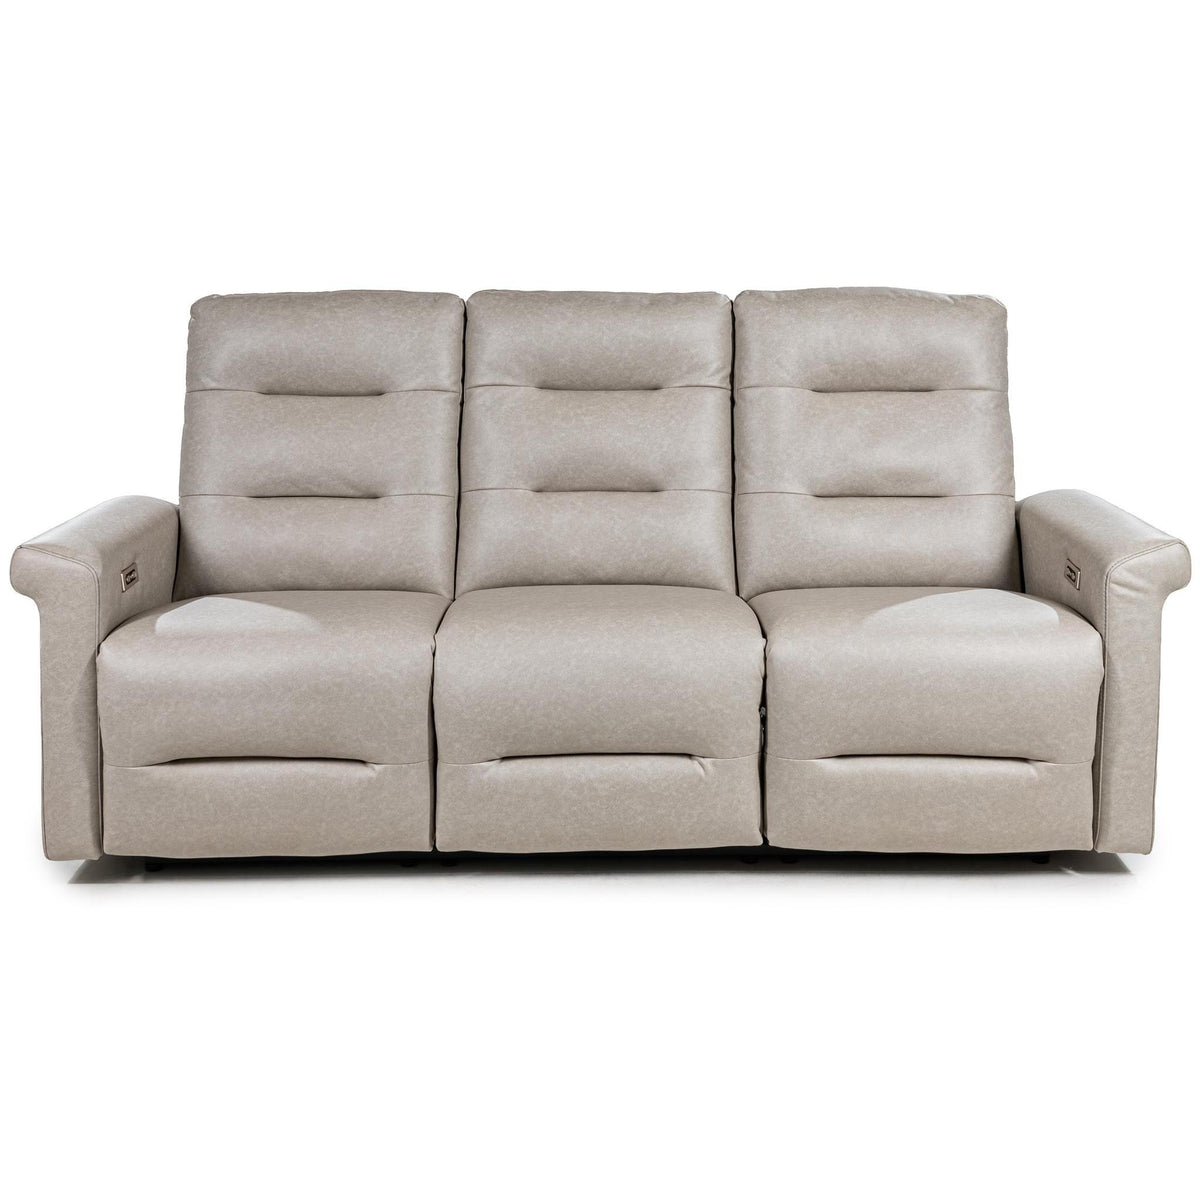 Ryleigh Power Reclining Leather Sofa IMAGE 1